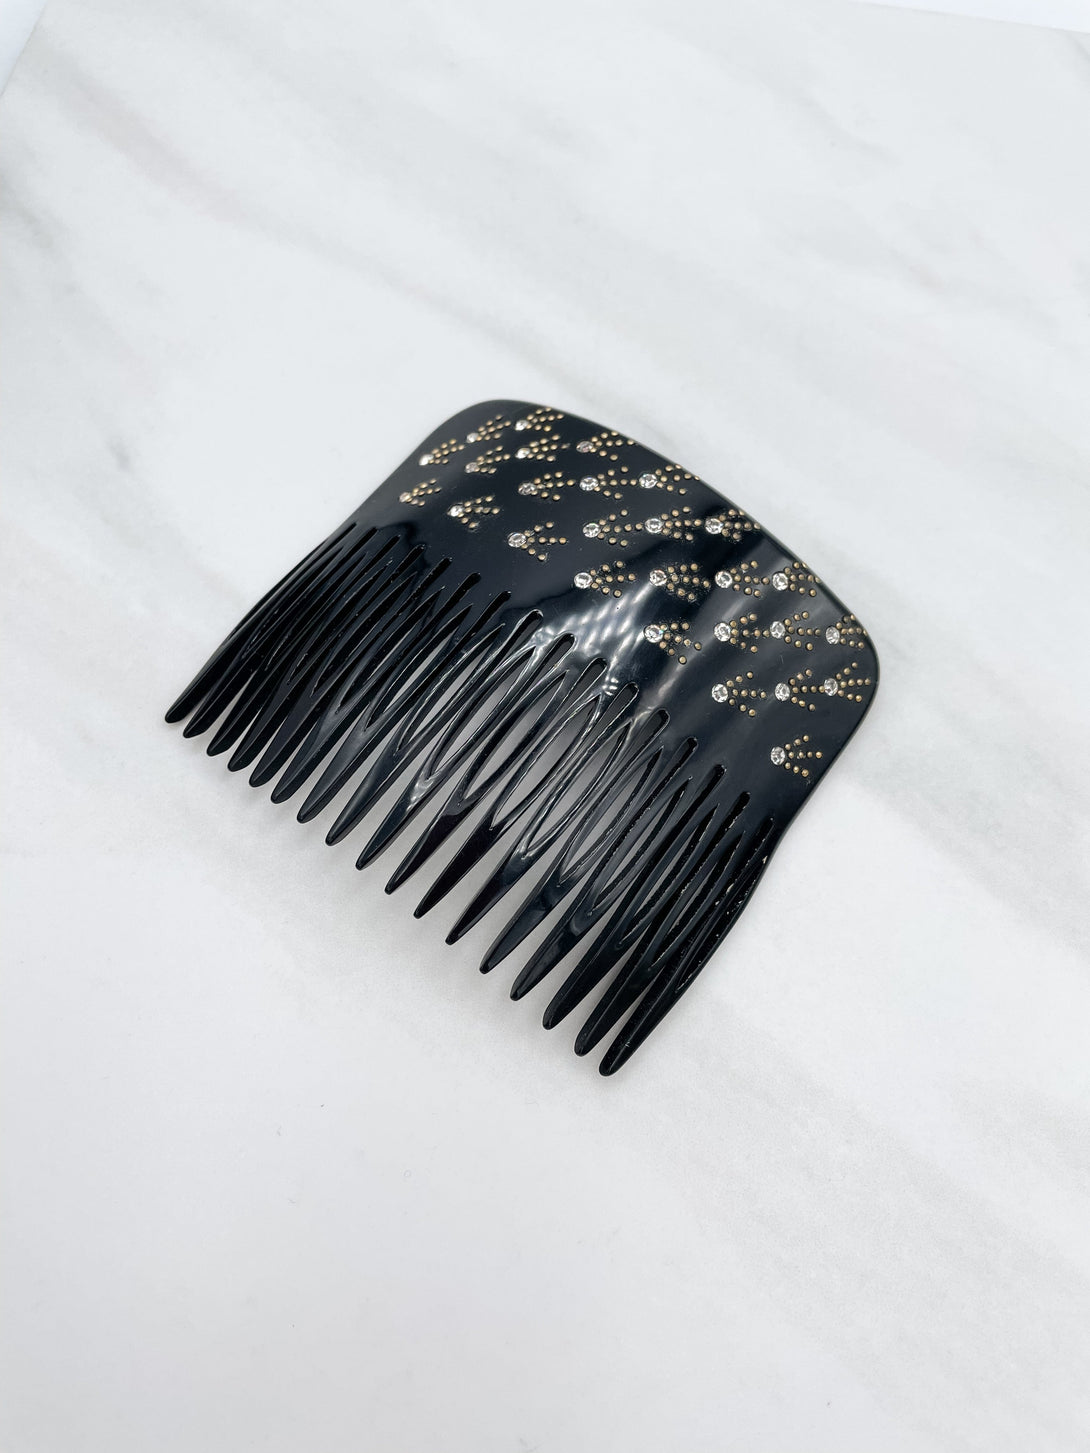 Vintage French Crystal Studded Hair Comb with Gold Accents